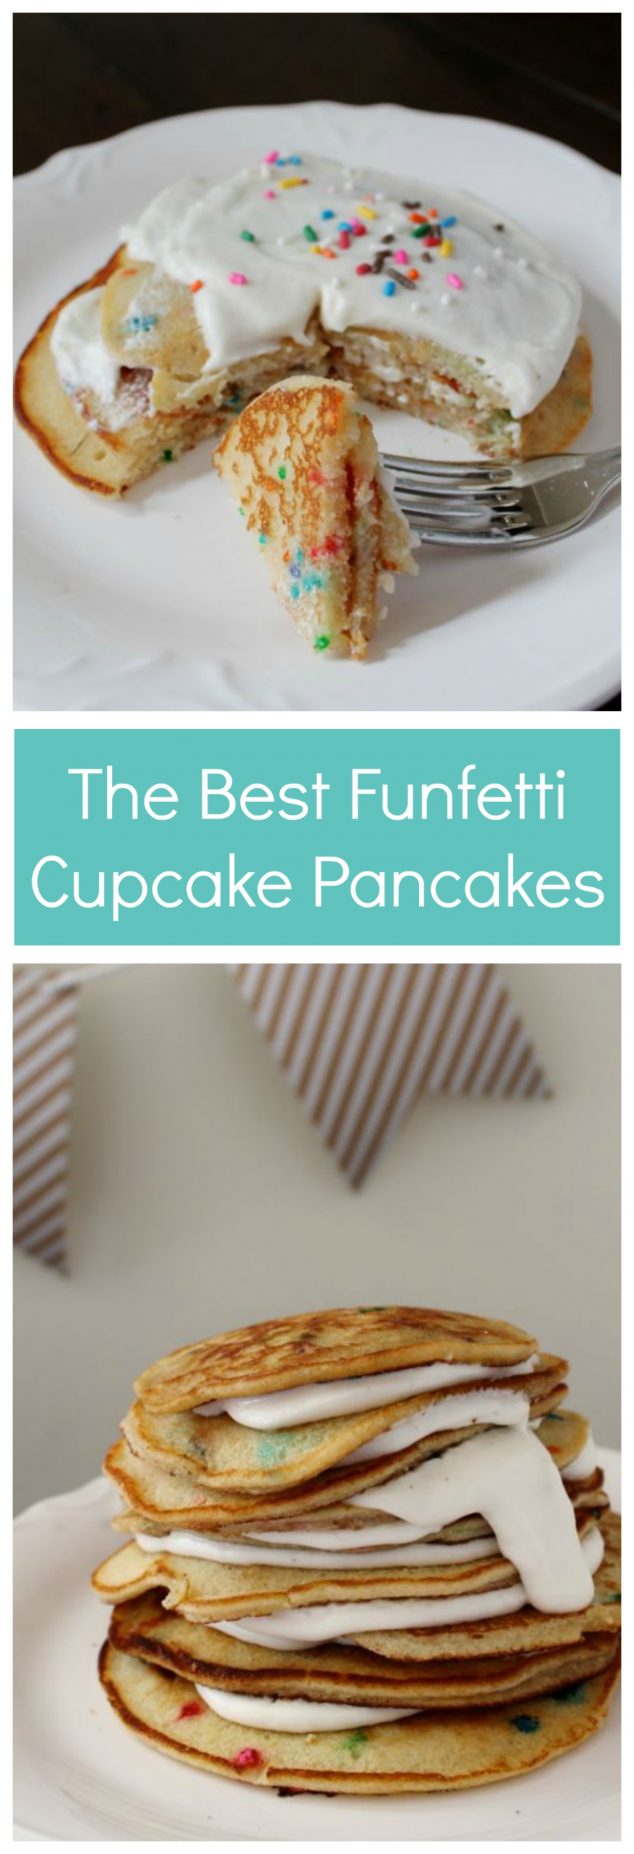 Funfetti Cupcake Pancakes is the type of treat to serve on a special occasion. It's indulgent and decadent and an exceptional way to begin your day.